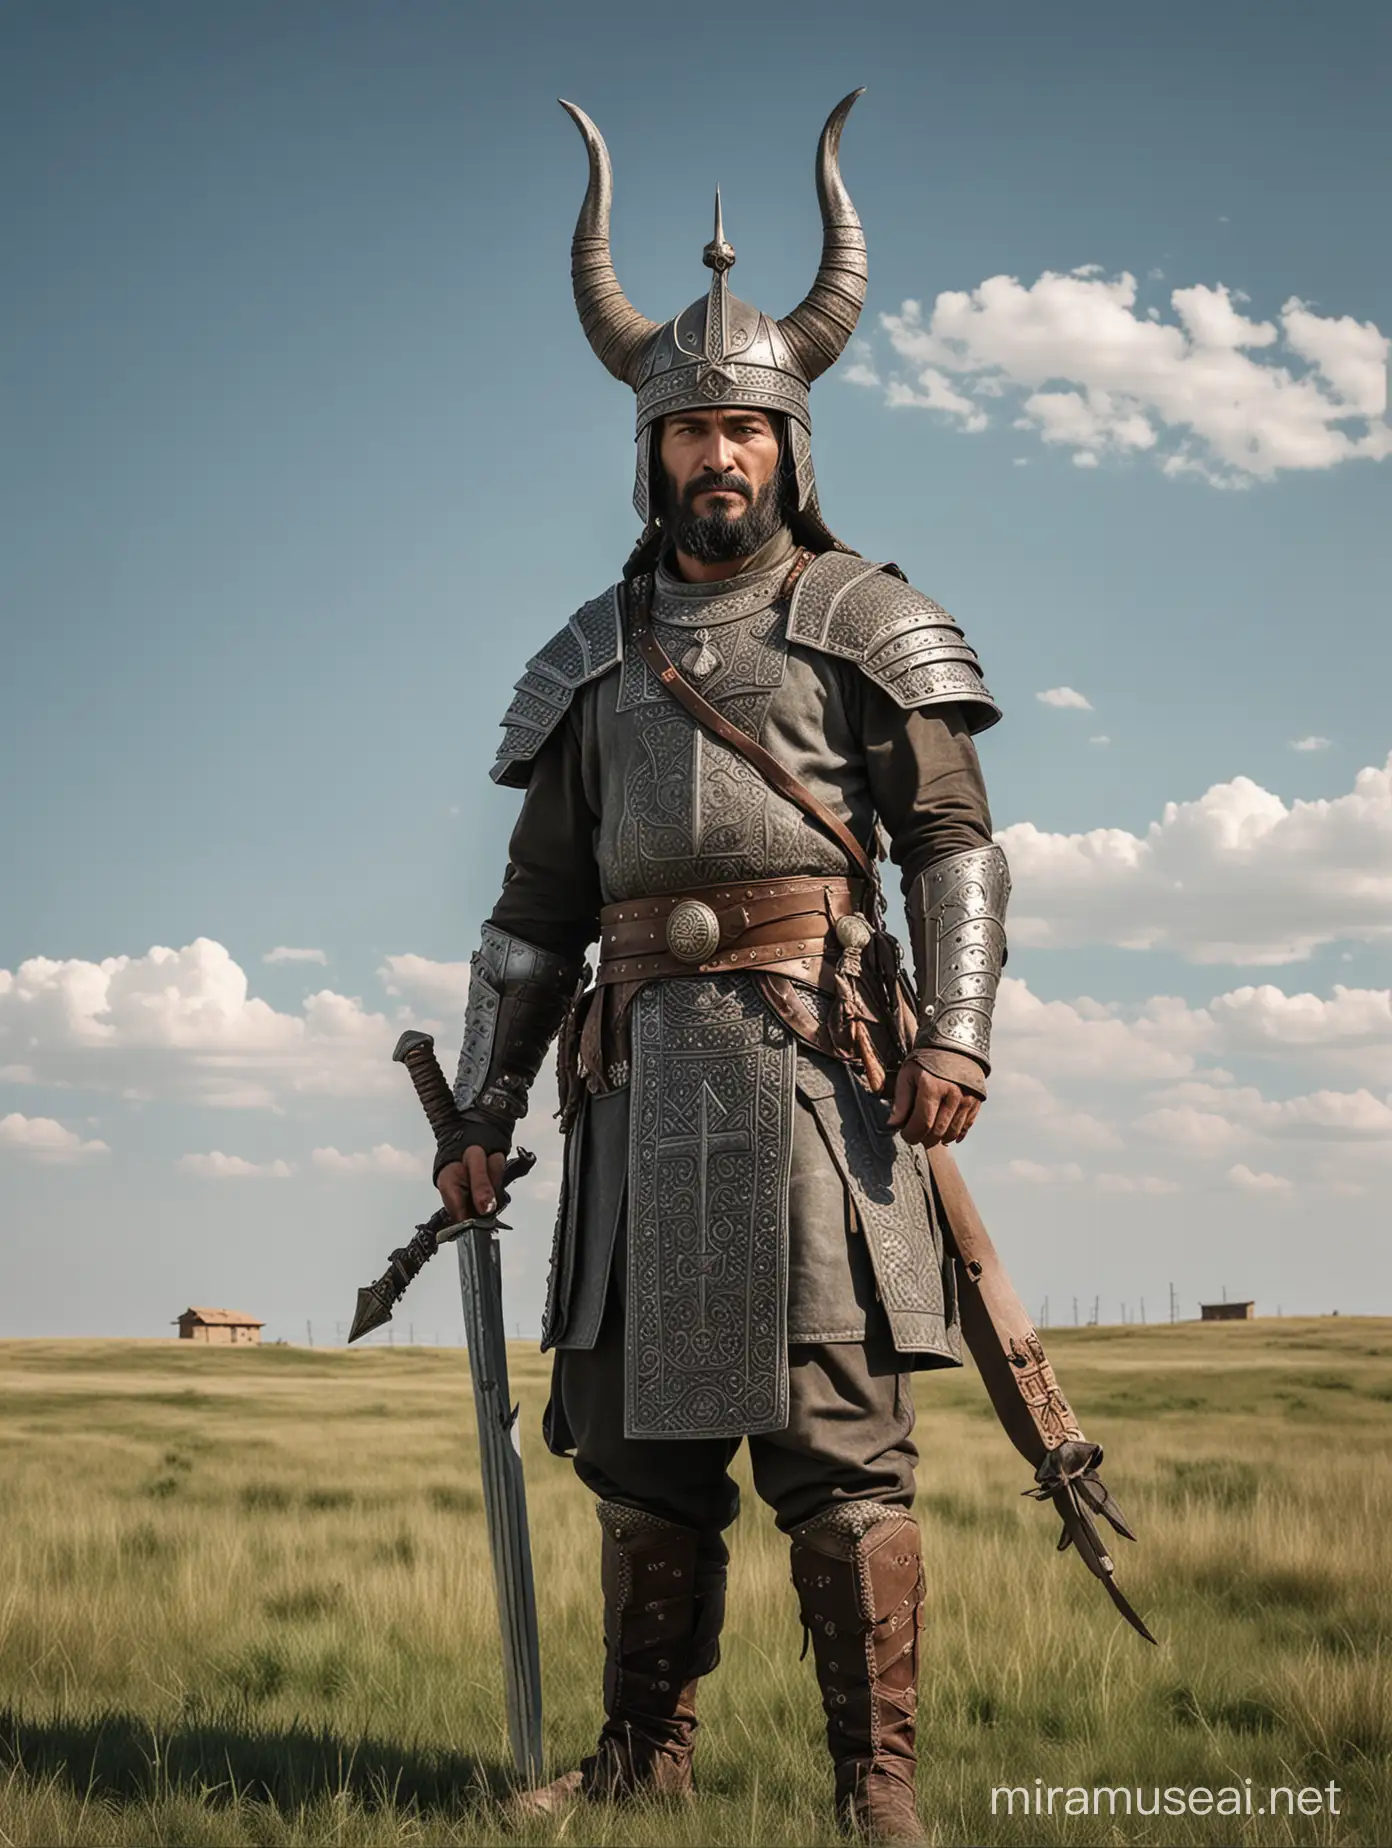 Ancient Turkic king wearing his horned helmet, big girdle with three crosses on it, holding his sword by scabbard in his right hand. He is standing on a flat grassland under a clear sky.